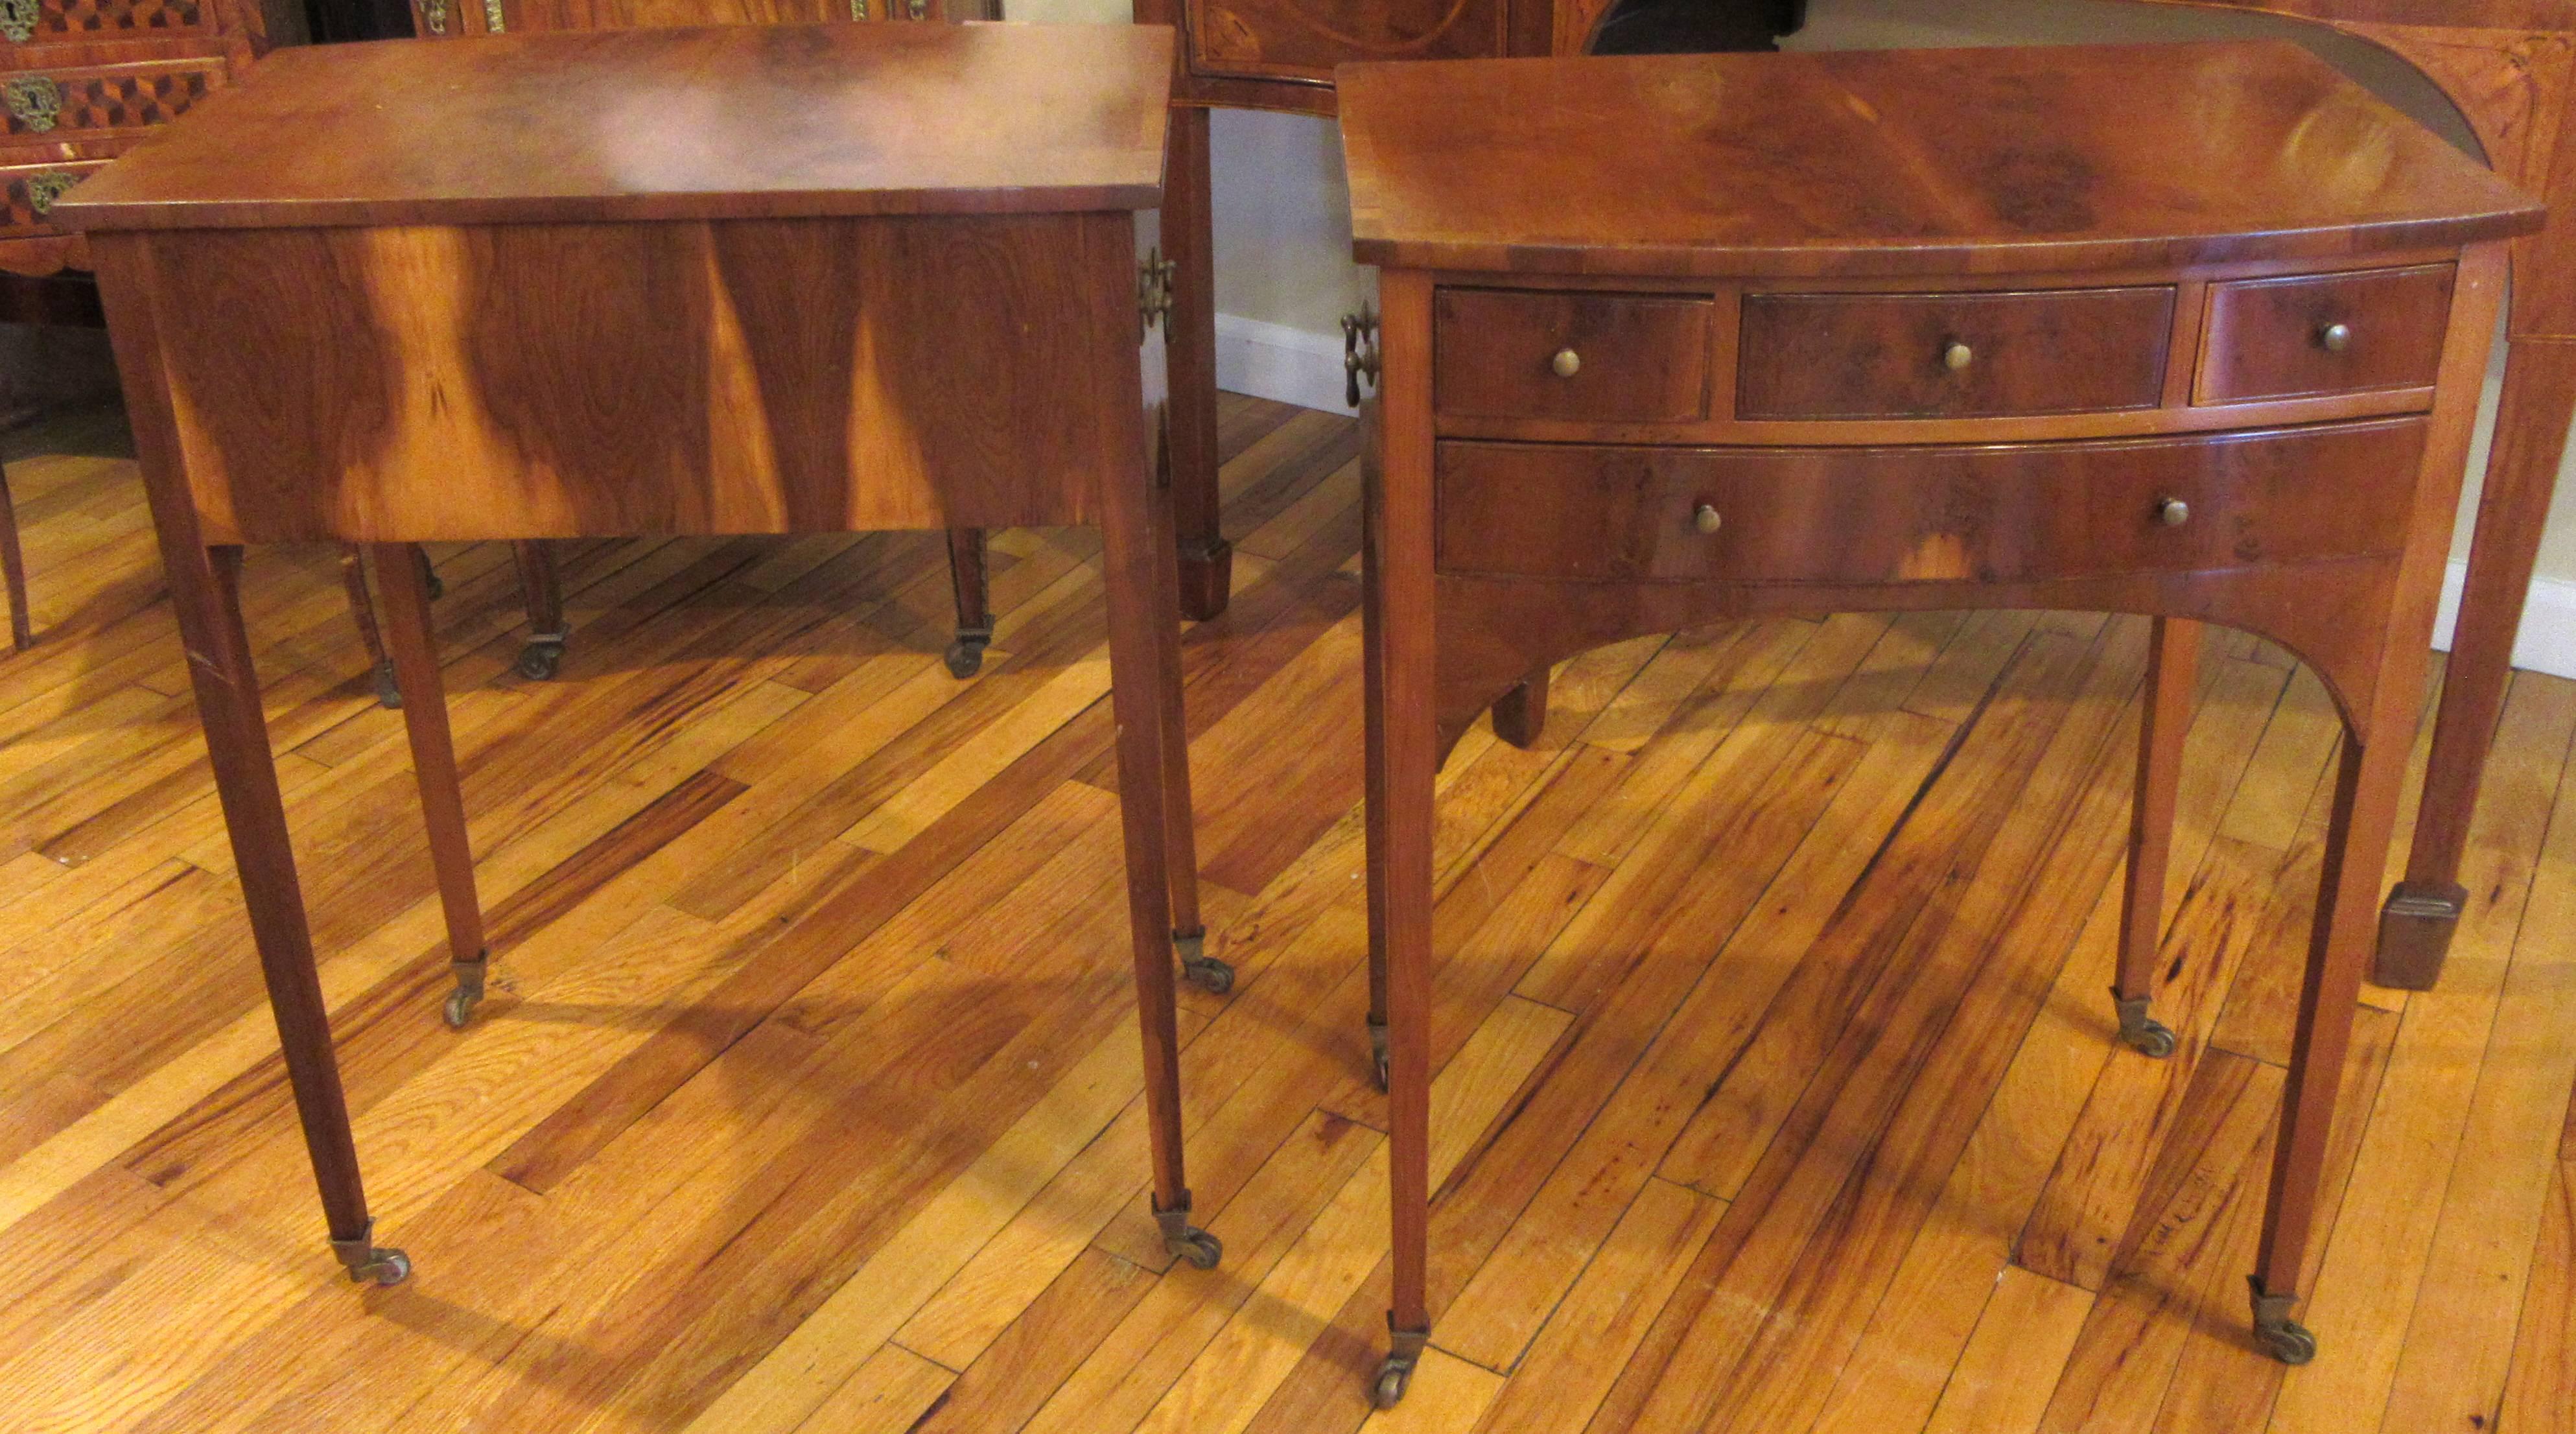 A pair of nicely proportioned four-drawer tables on brass casters. Flame mahogany veneer with original brass hardware.